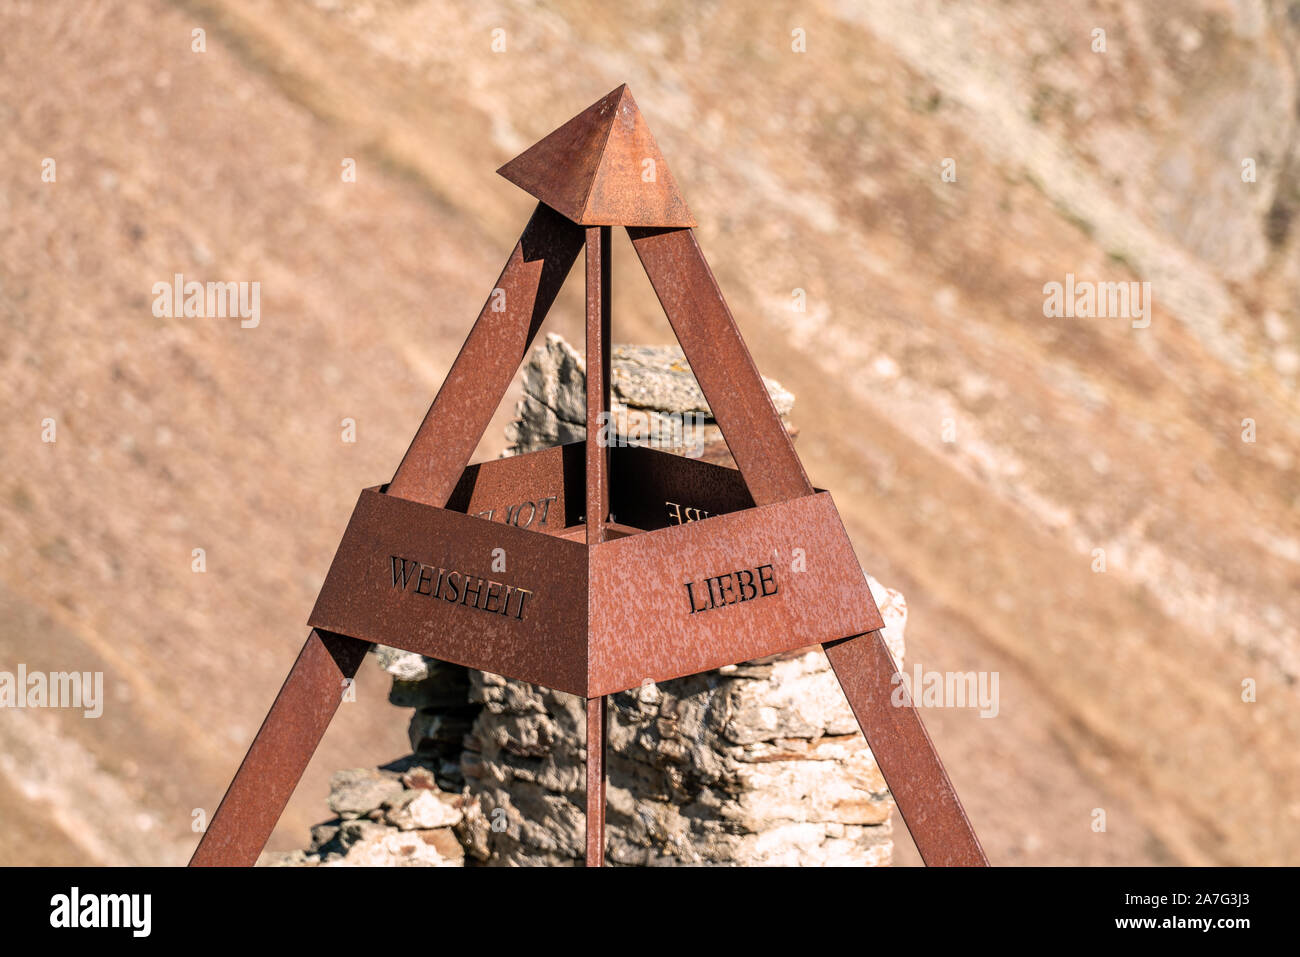 Outddors artwork made of iron shaped like a pyramid with inscribed words LOVE and WISDOM Stock Photo